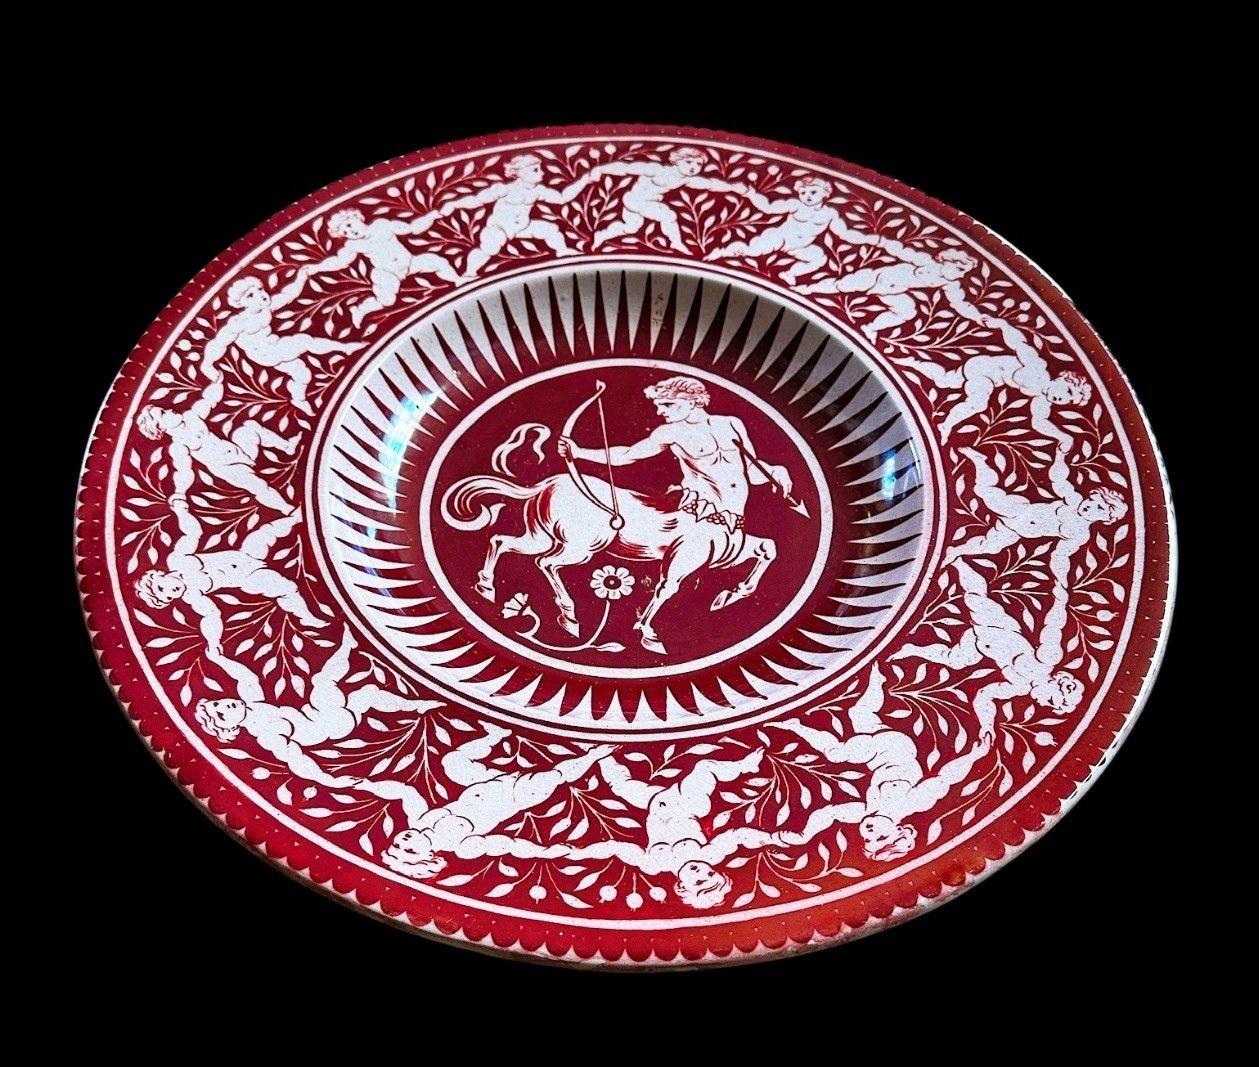 5483
Large Ruby Lustre William De Morgan Charger decorated with a Central Cenatour with a Border of Dancing Putti
Light scratches and some glaze irregularities
Similar Designs Illustrated in Martin Greenwood’s “The Designs of William De Morgan” Page